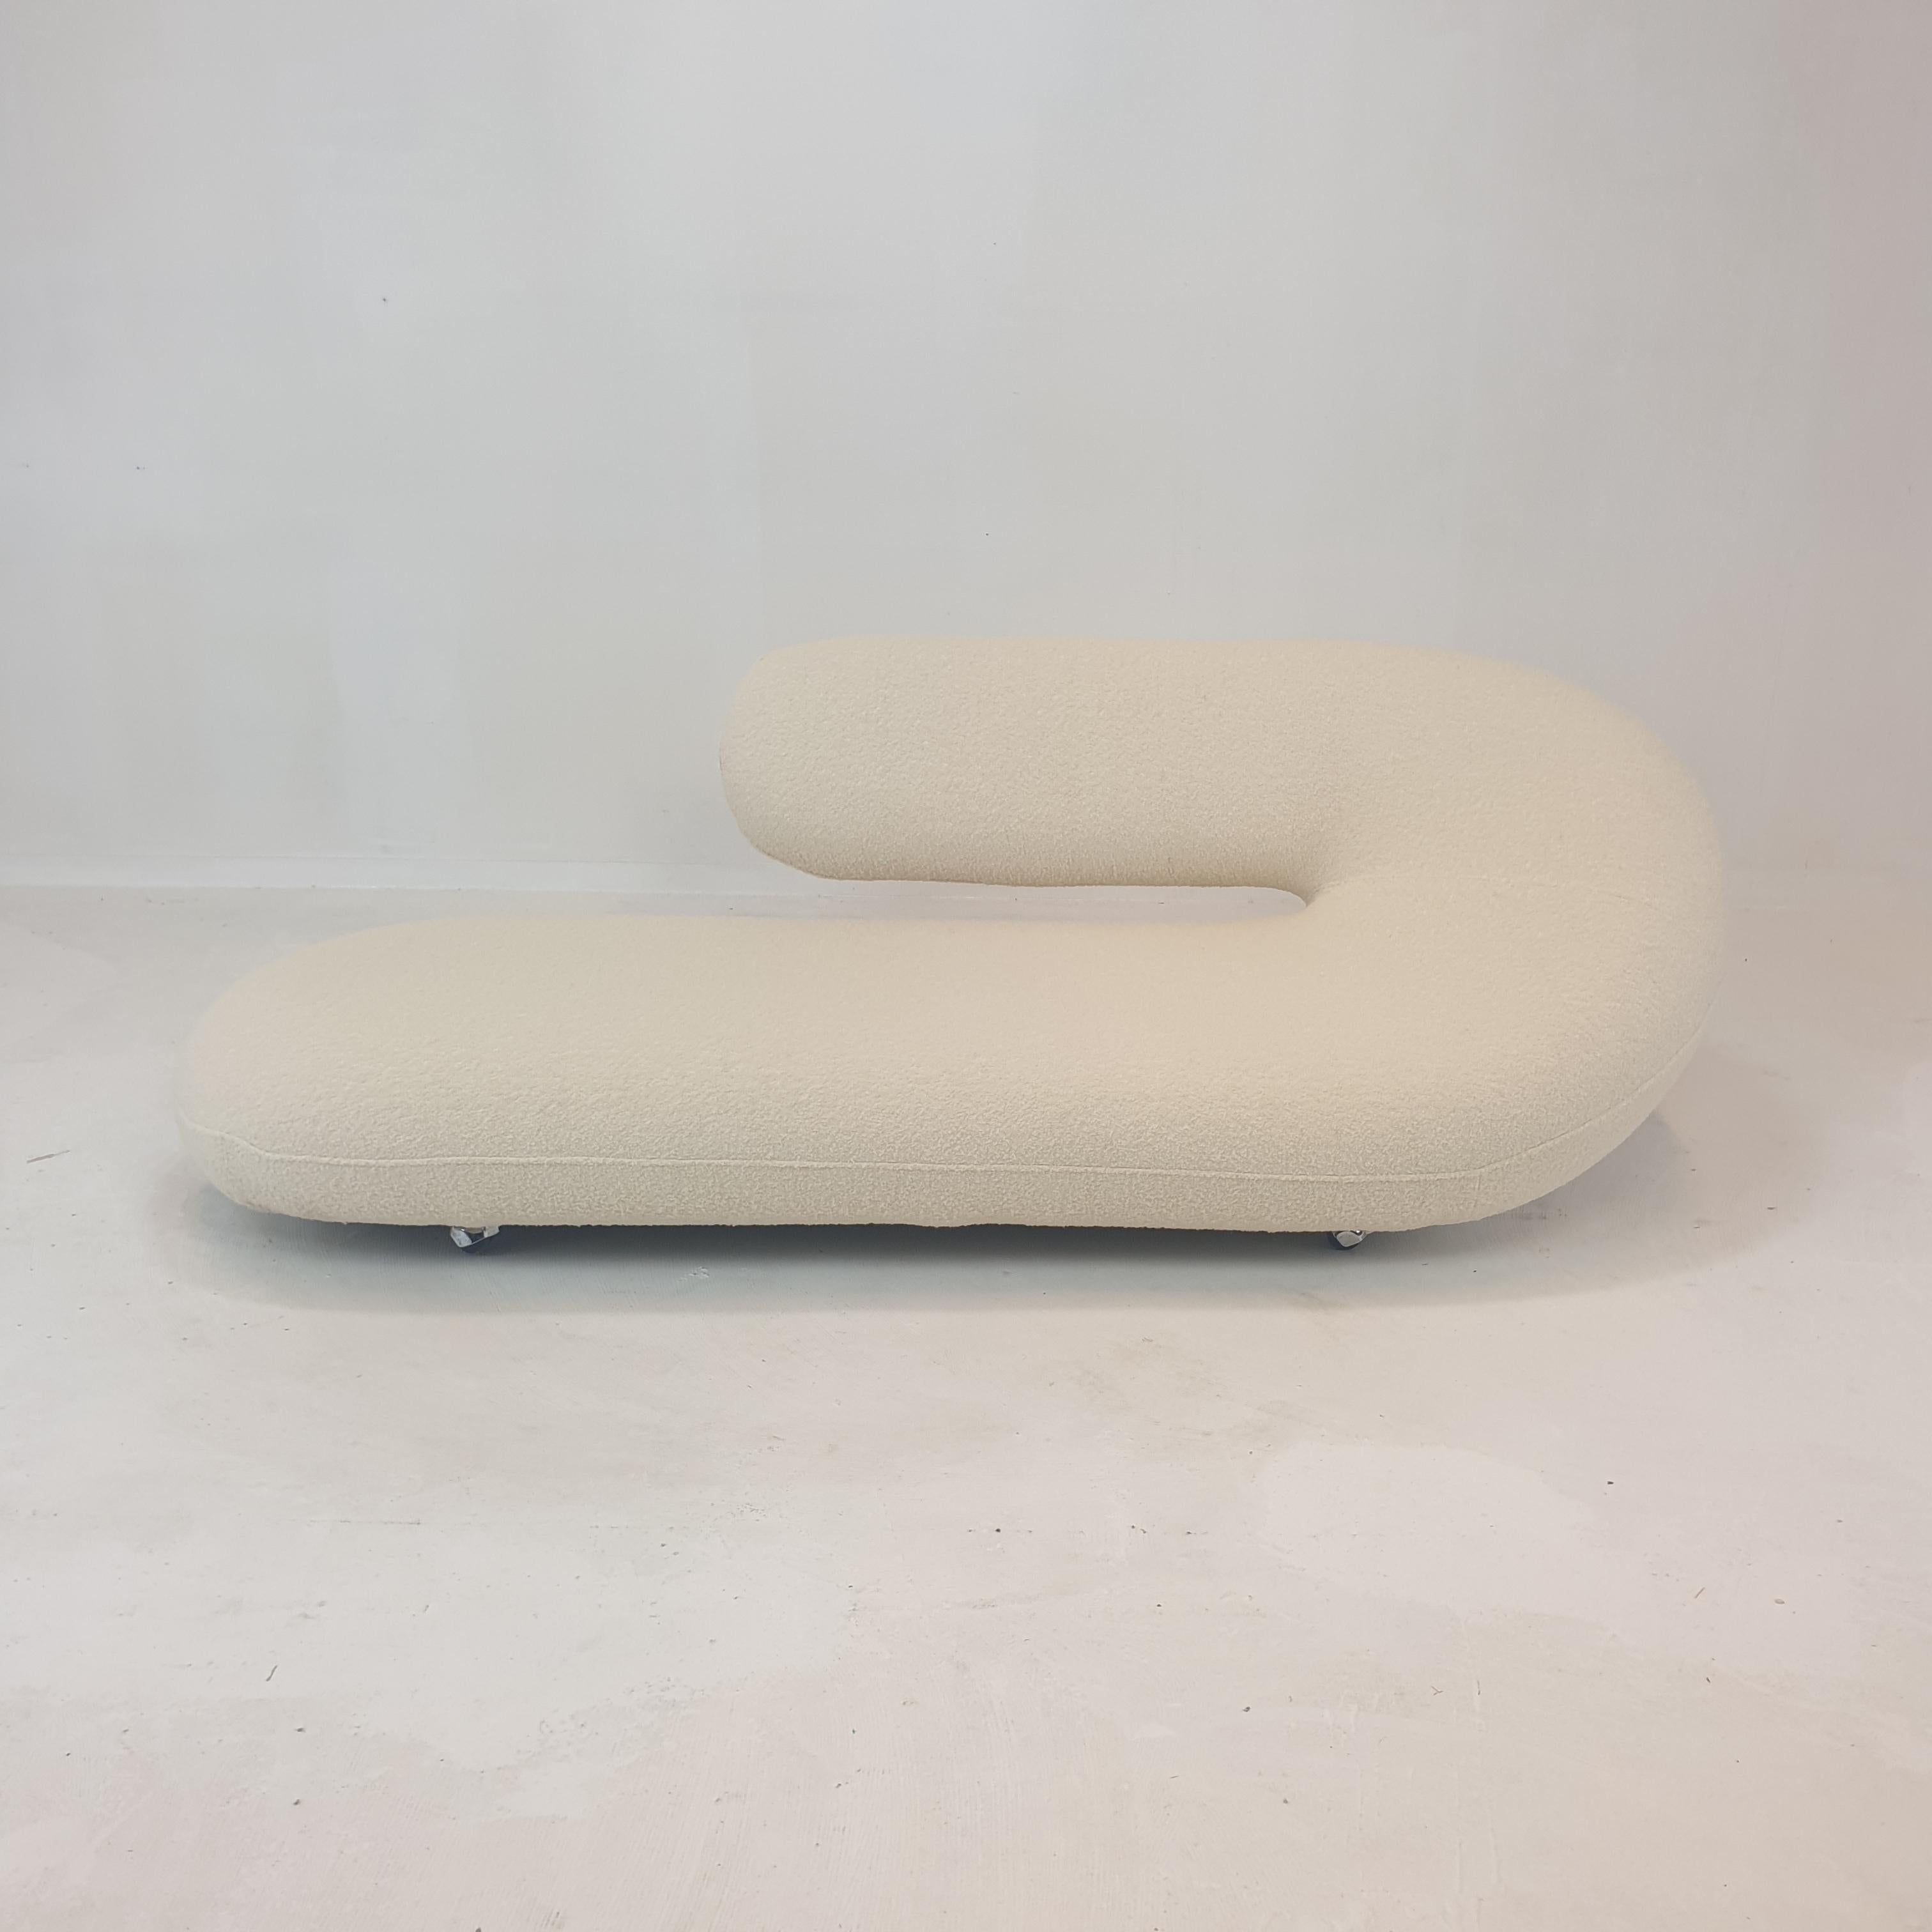 This beautiful model Cleopatra chaise longue or sofa was designed by Geoffrey Harcourt for Artifort in the 70's. 

This original Artifort piece has just been reupholstered with lovely and soft Italian wool fabric, so it is in perfect condition.